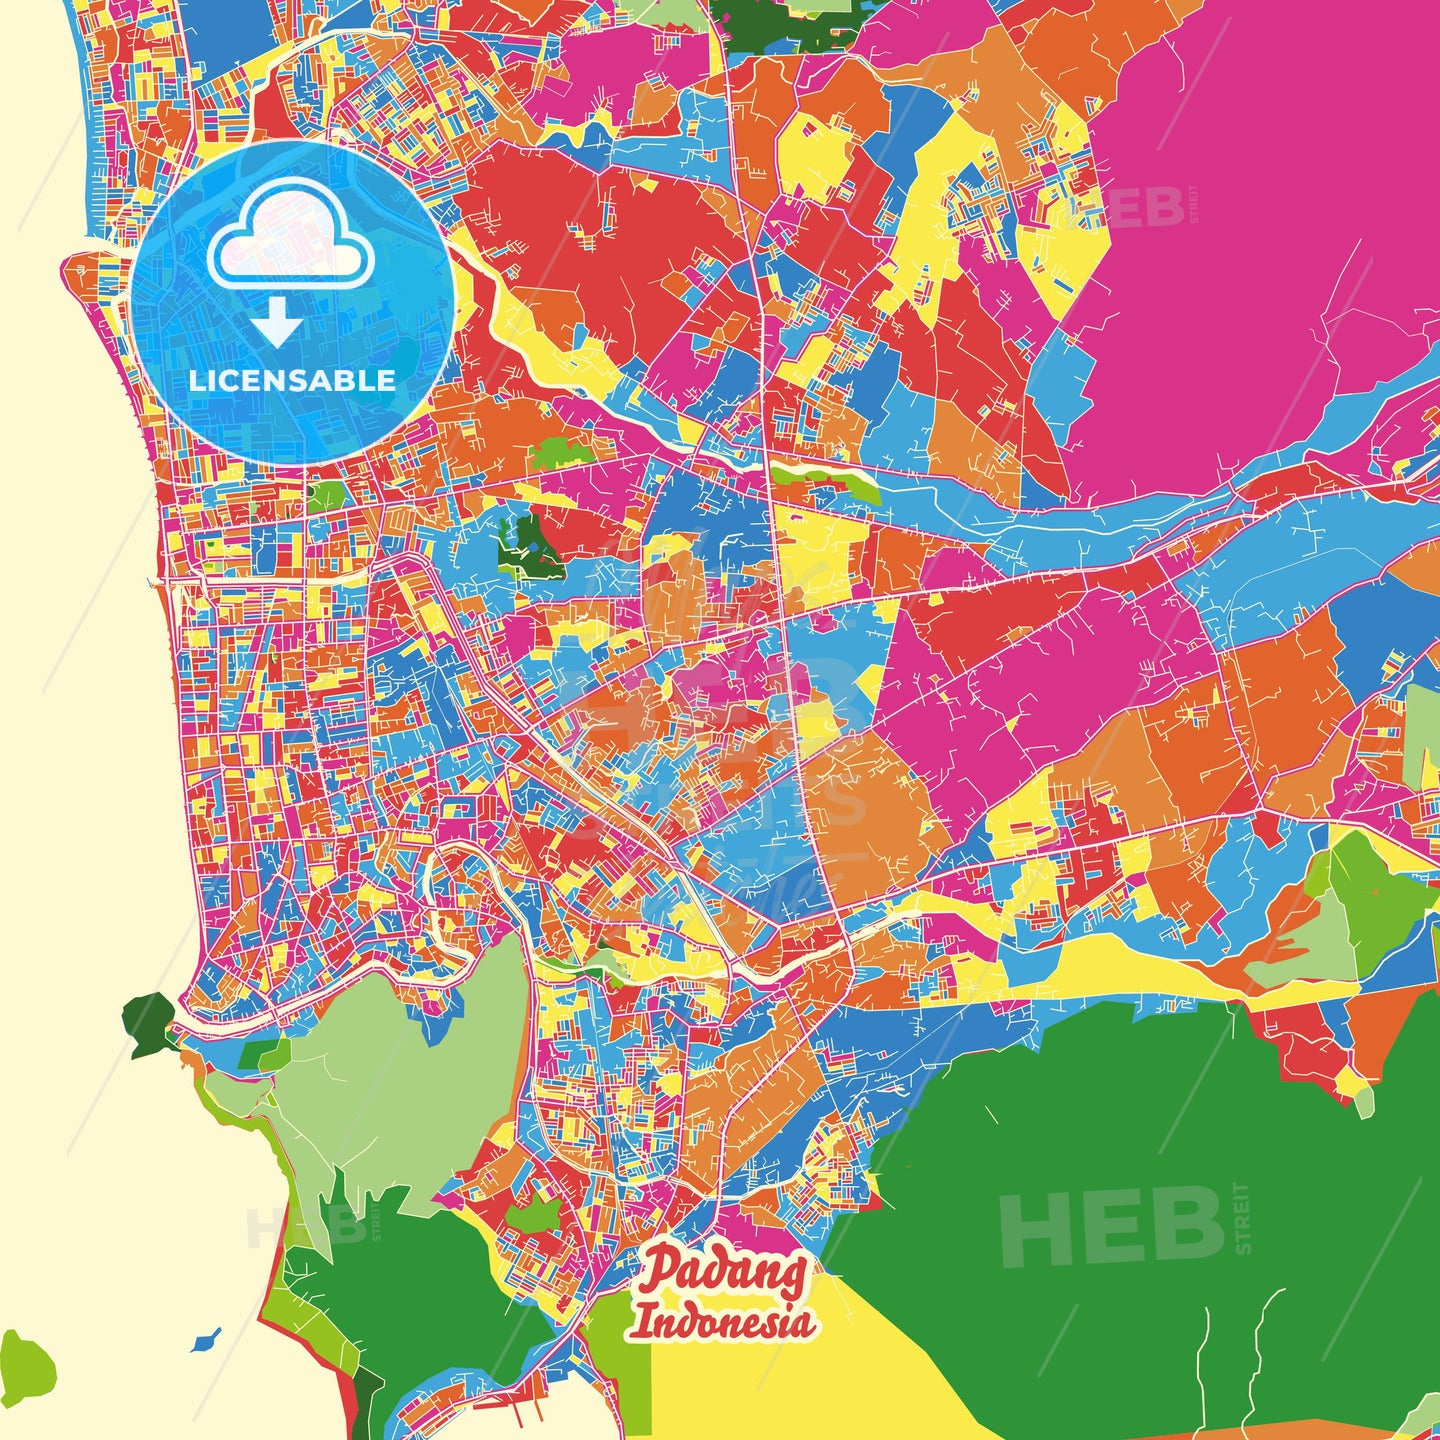 Padang, Indonesia Crazy Colorful Street Map Poster Template - HEBSTREITS Sketches